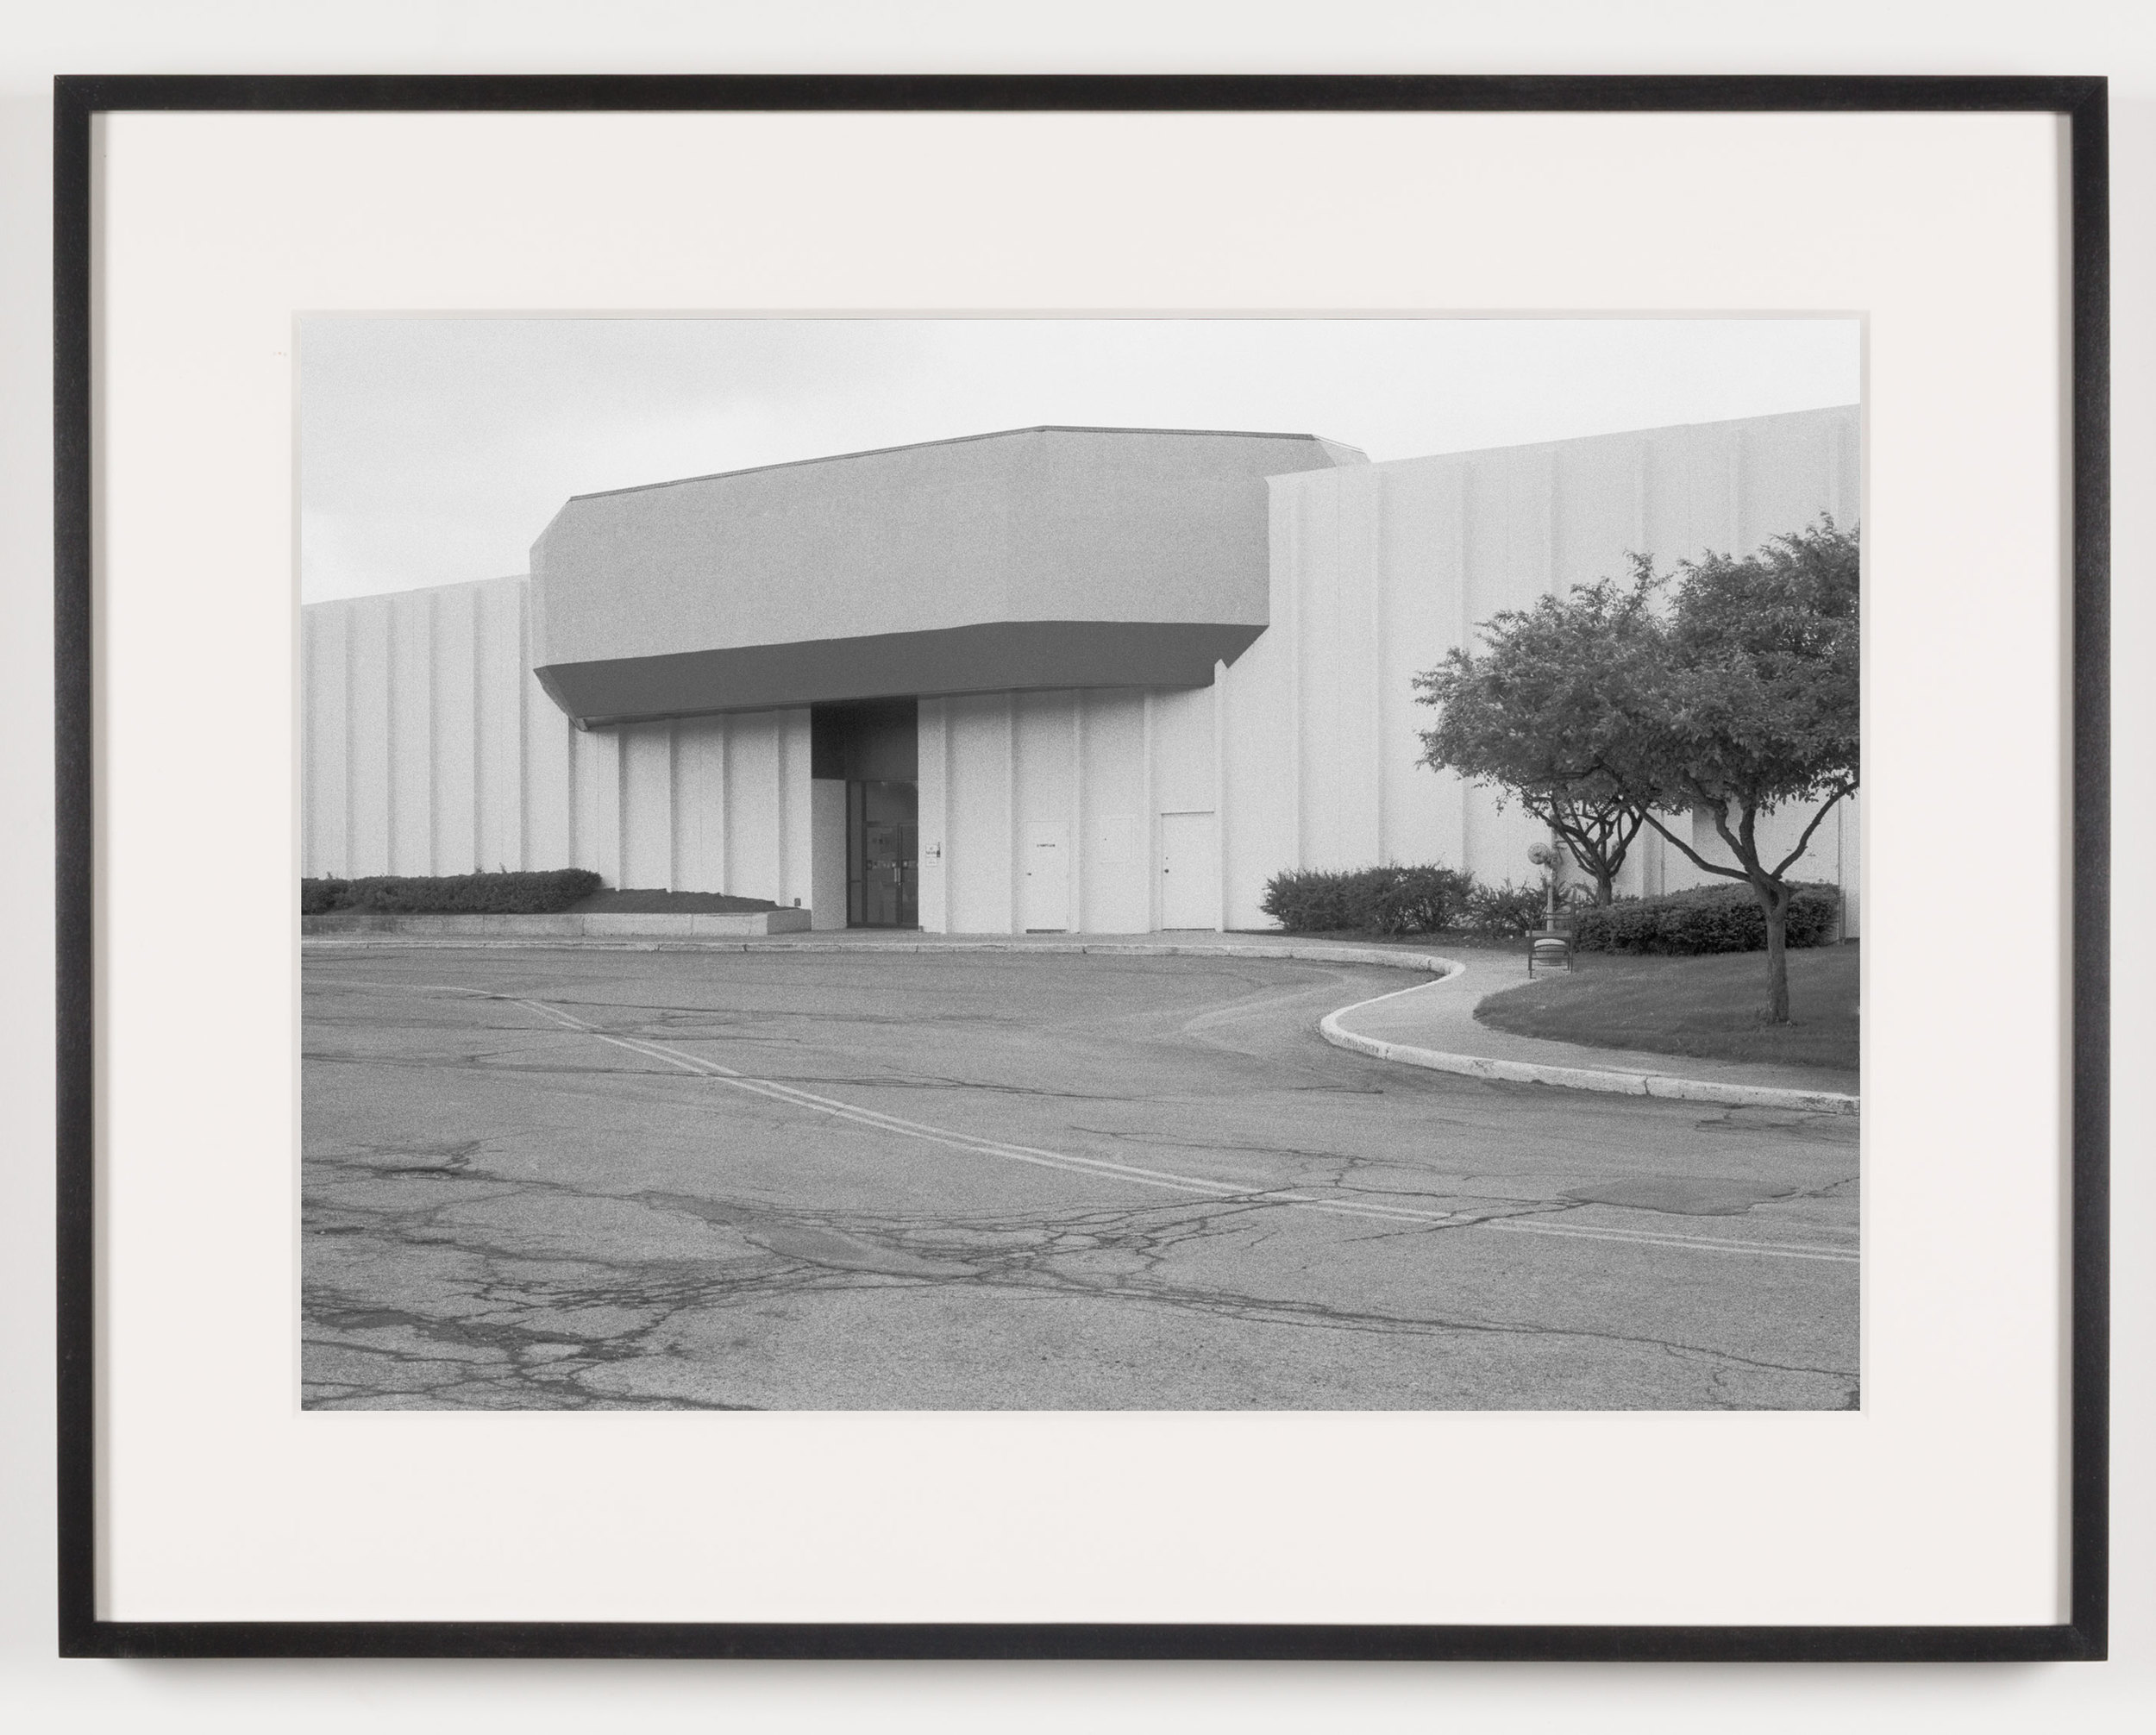   Midway Mall (View of Exterior, 'Sears'), Elyria, OH, Est. 1965    2011   Epson Ultrachrome K3 archival ink jet print on Hahnemühle Photo Rag paper  21 5/8 x 28 1/8 inches  Exhibition:   A Diagram of Forces, 2011  